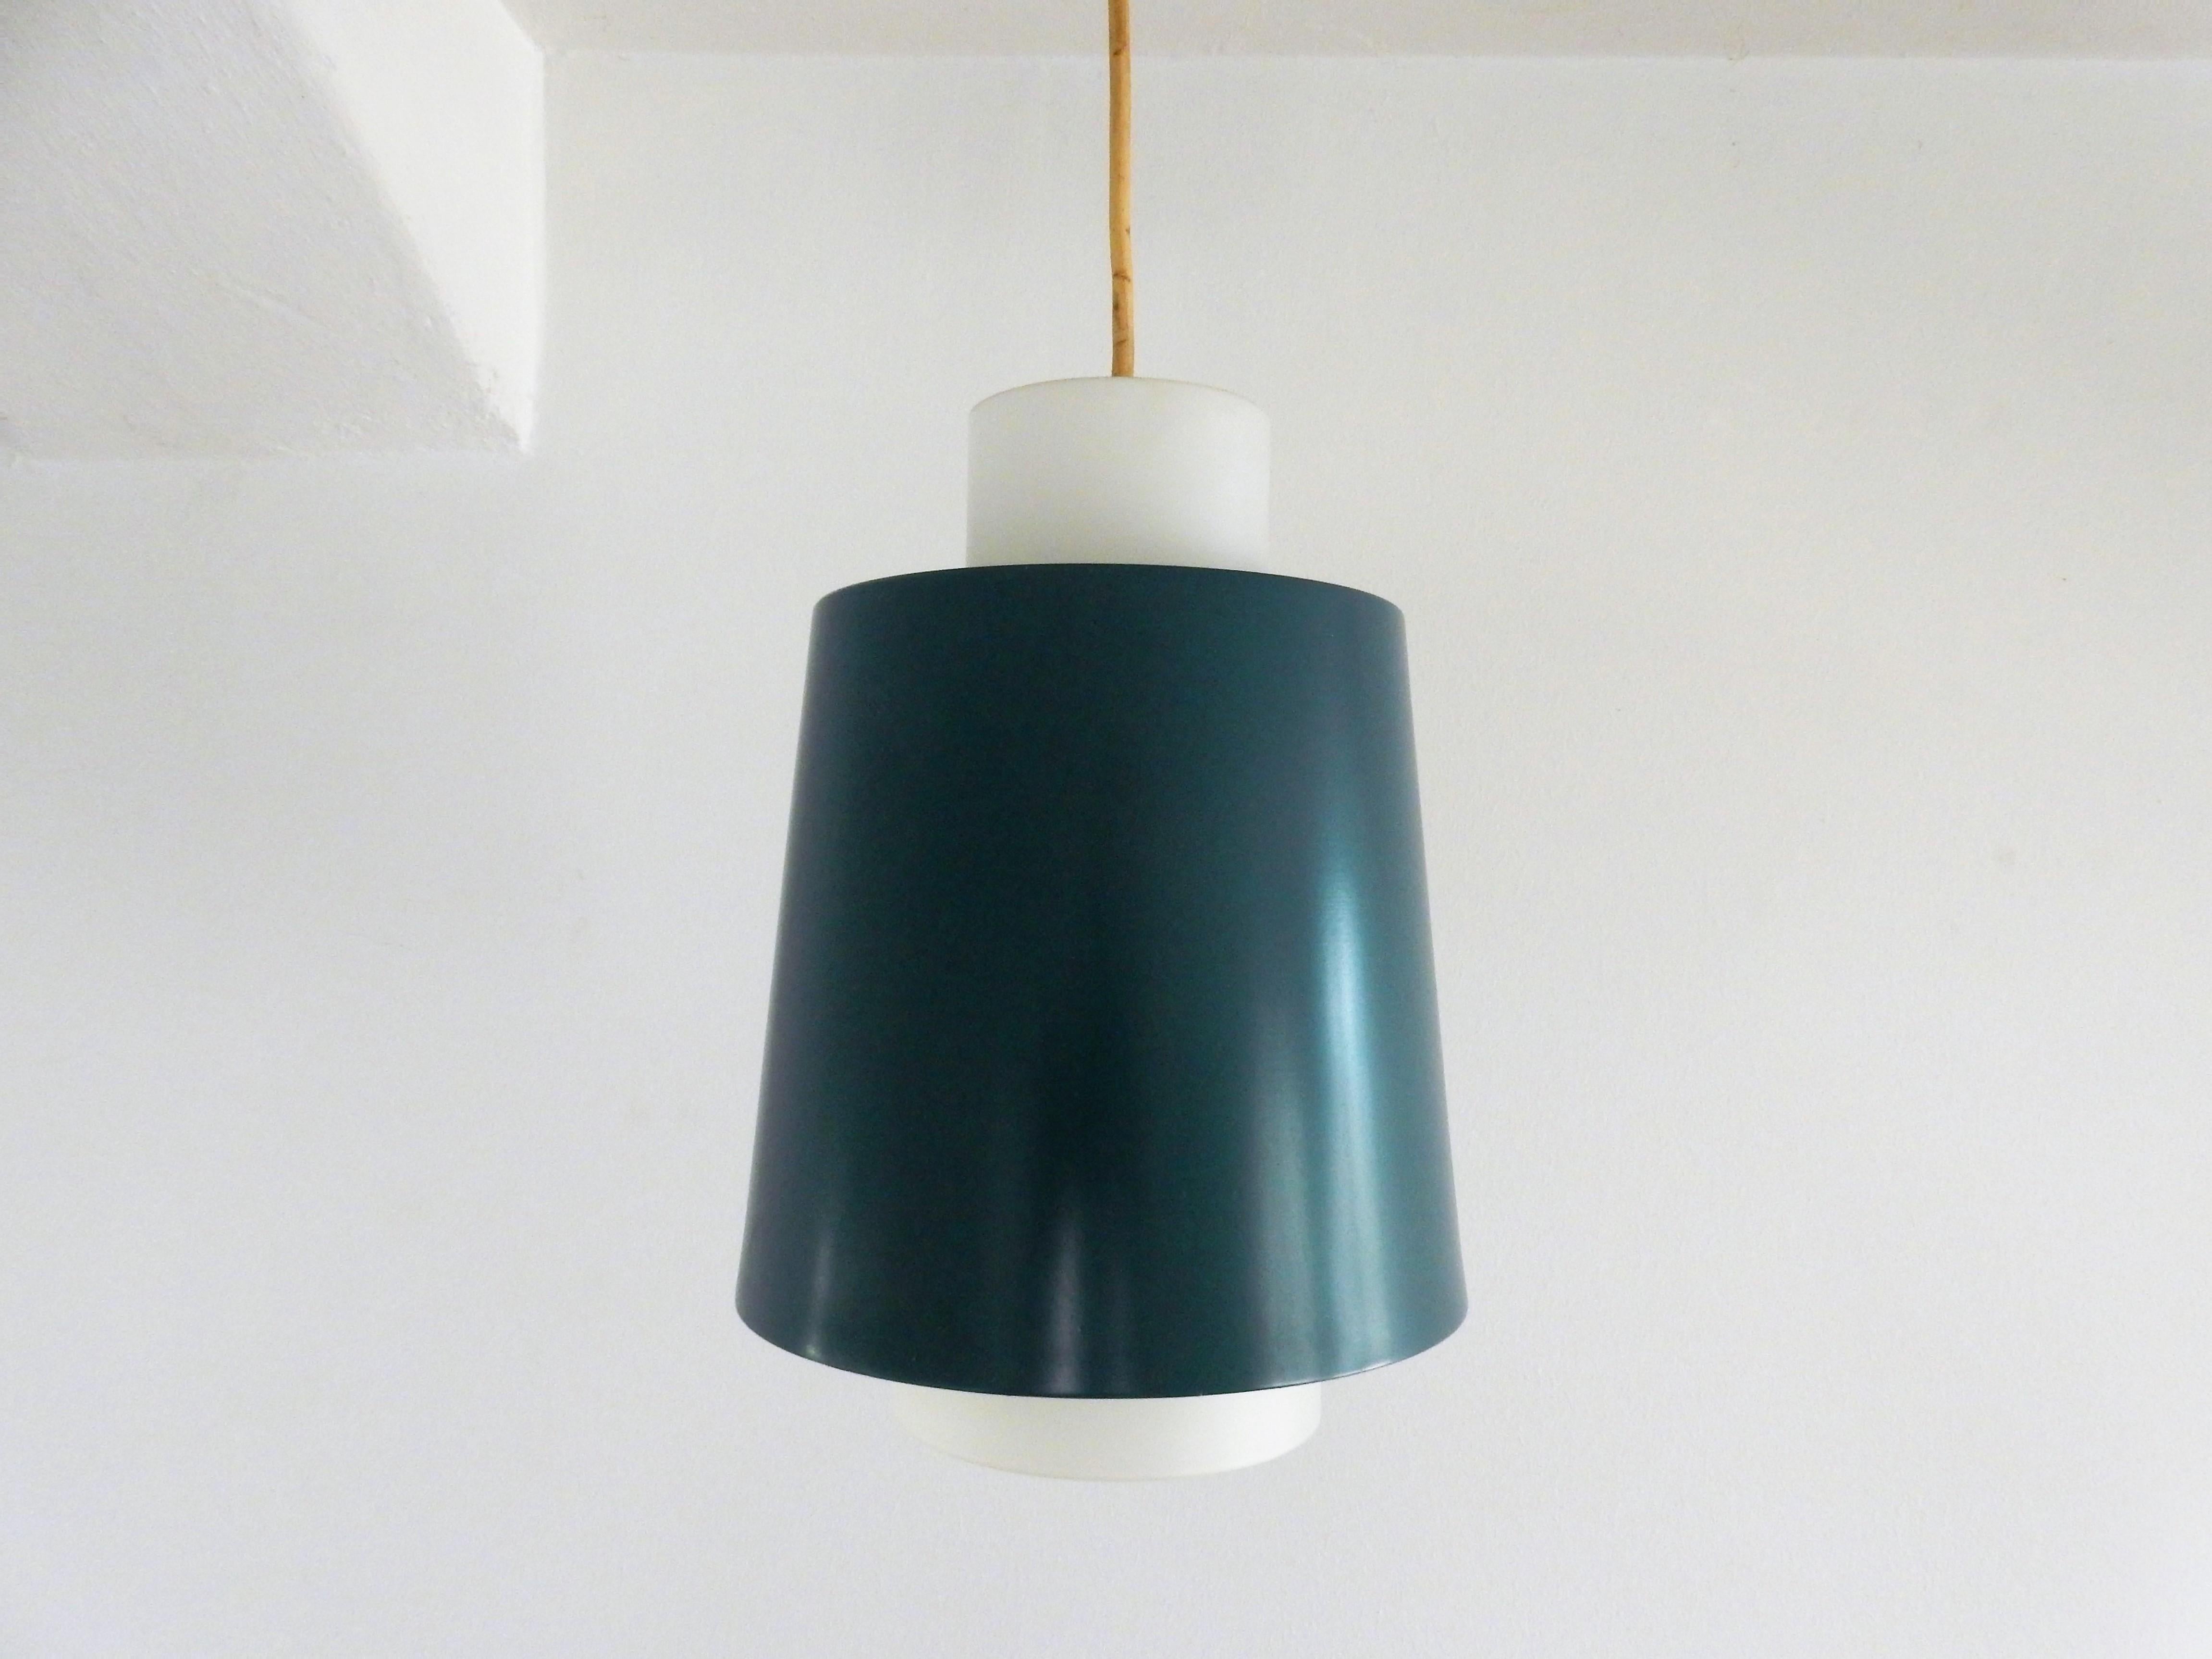 This is a nice fresh colored blue and white pendant lamp in the style of Philips. The shade is made of opaline glass and lacquered metal.